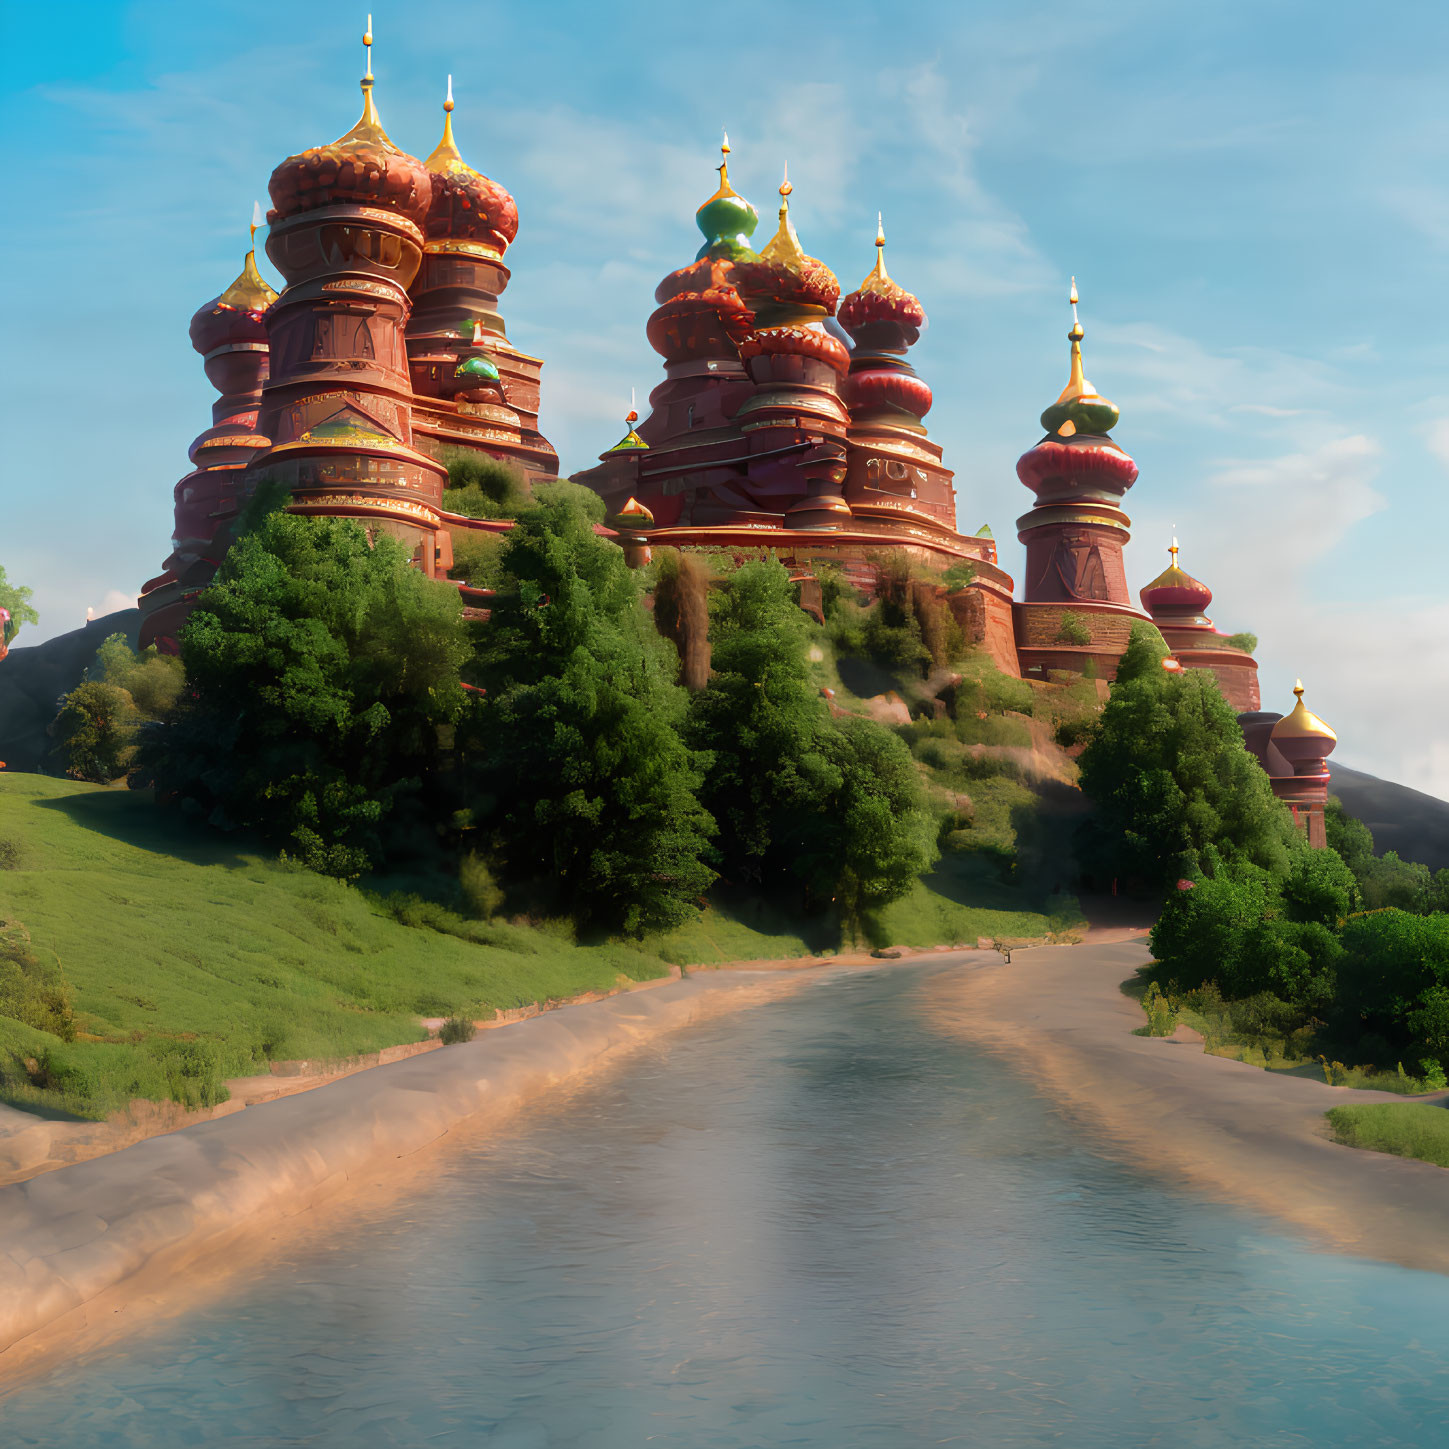 Majestic castle on verdant hill by calm river